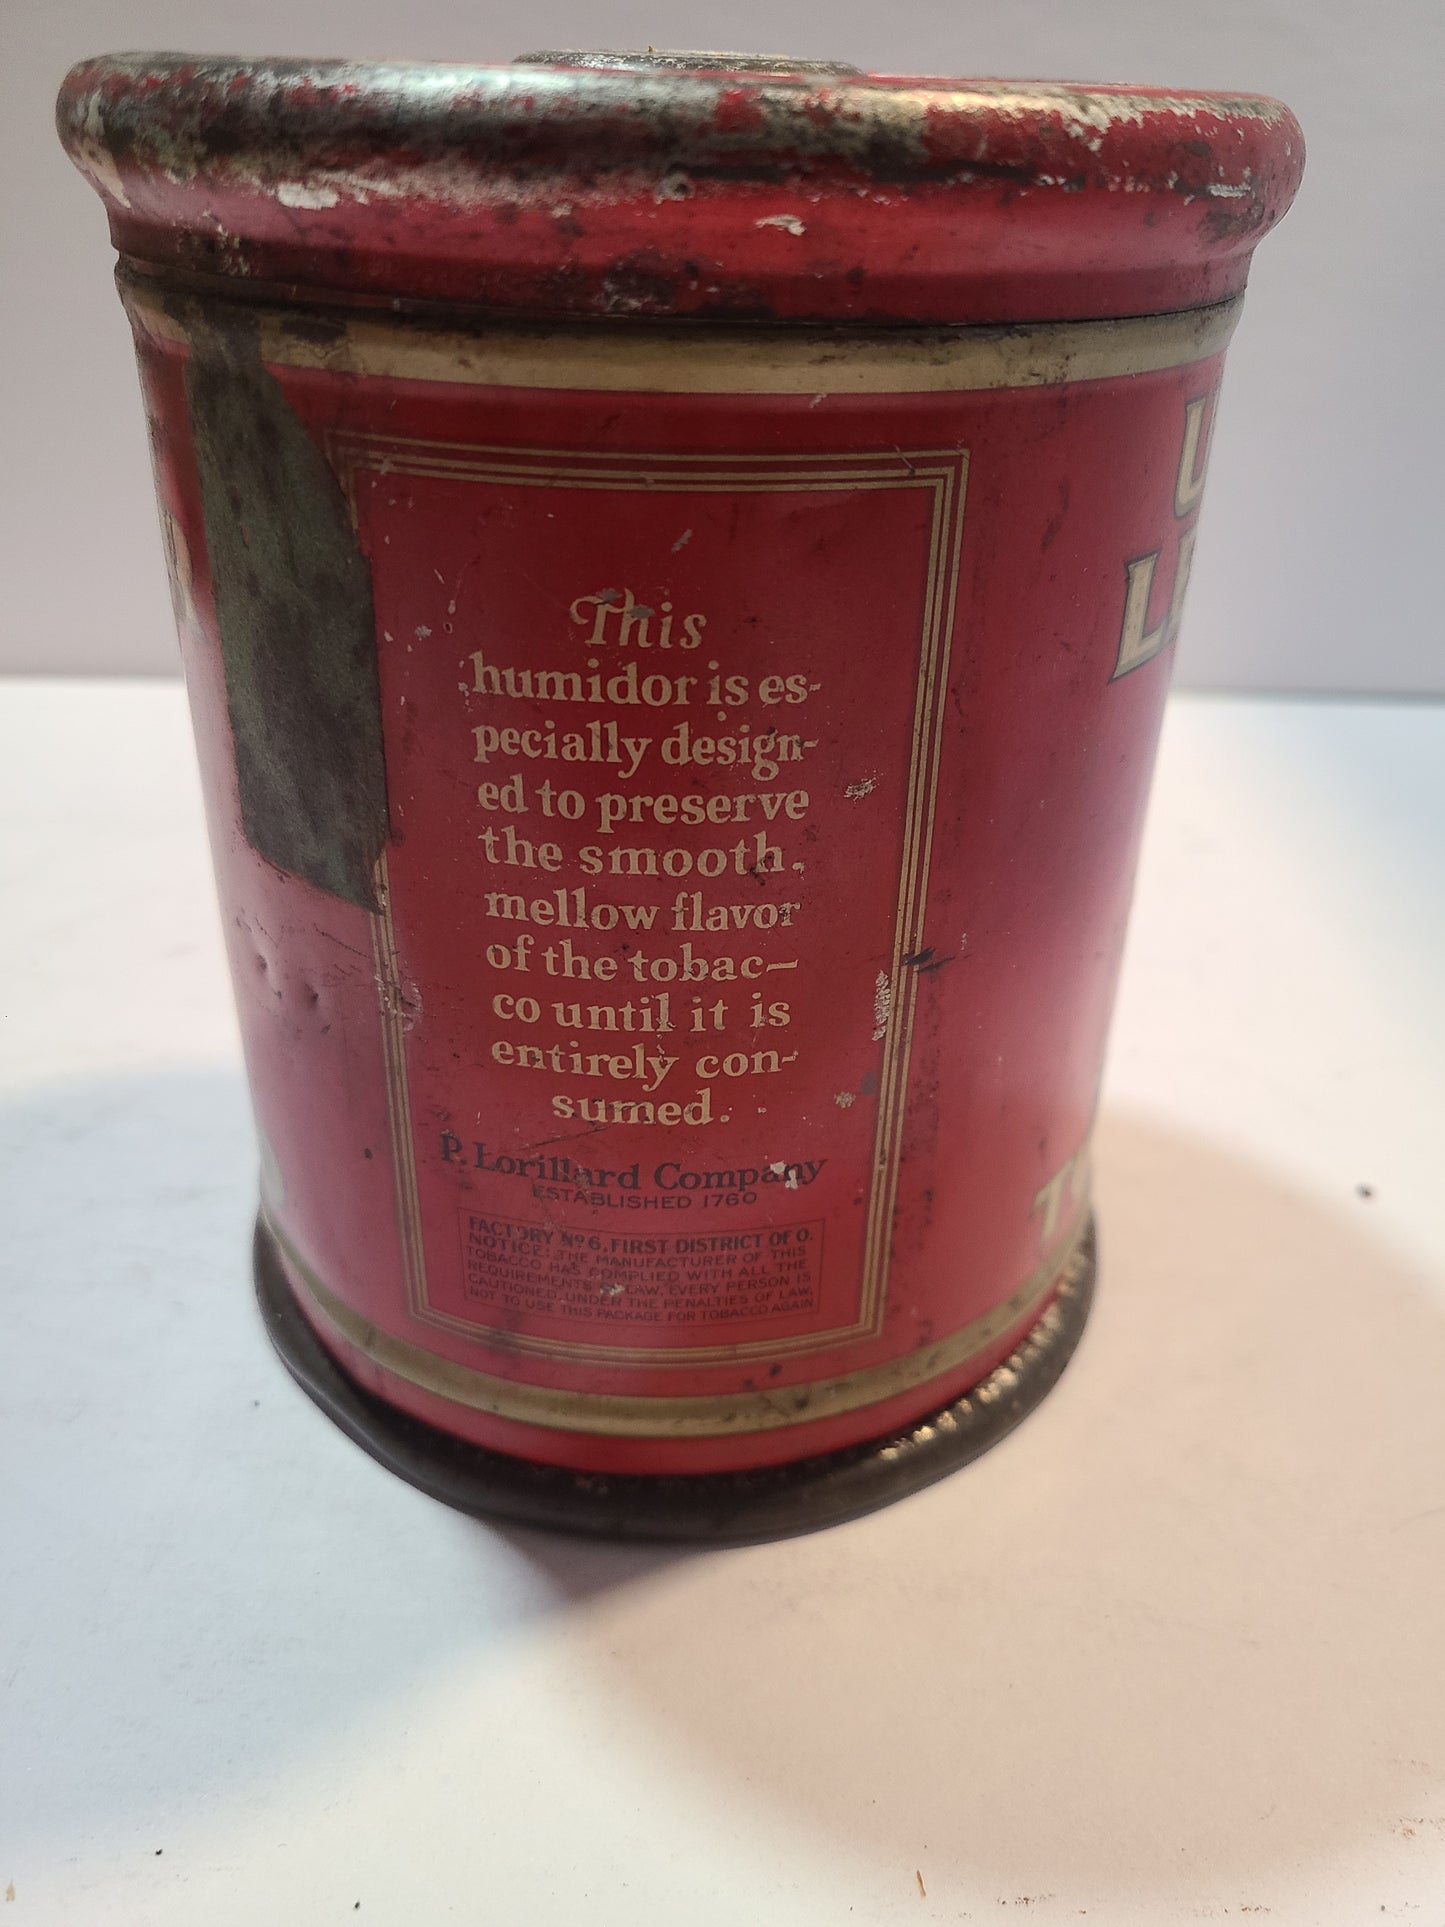 Vintage Union Leaders tobacco can